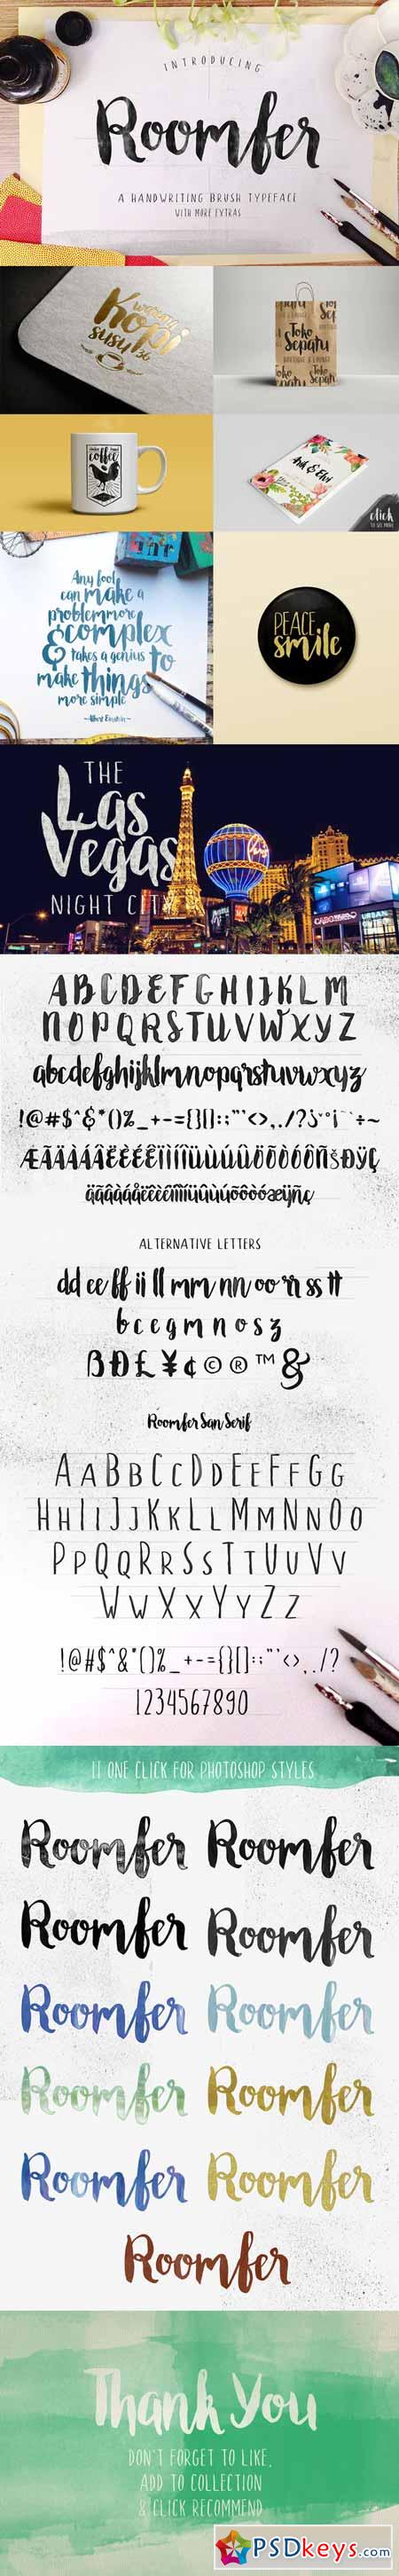 Roomfer font + Extras 285462